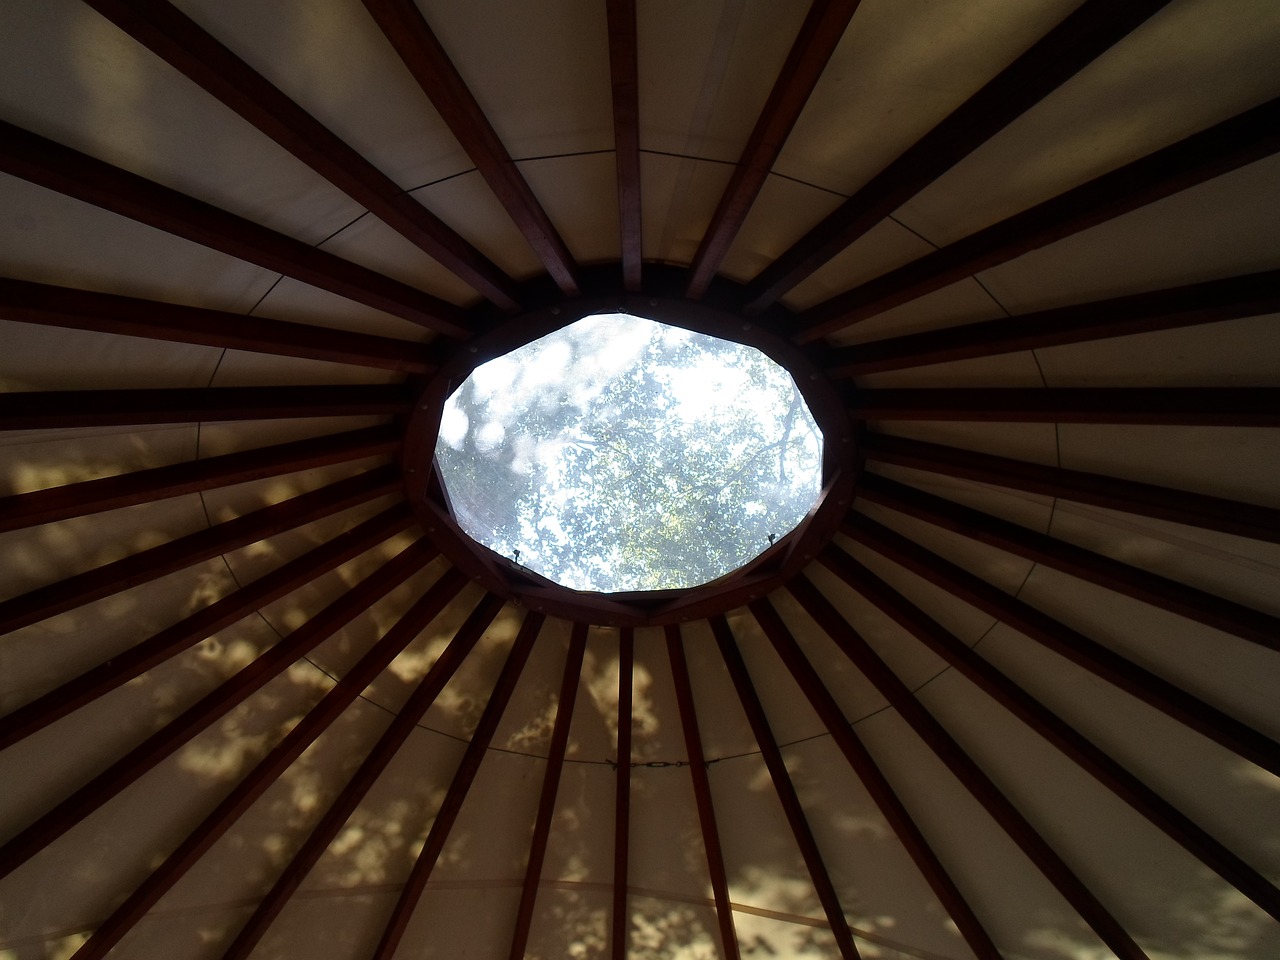 Easy Modifications to Ensure Your Yurt is Livable and Delightfully Homely Year-Round